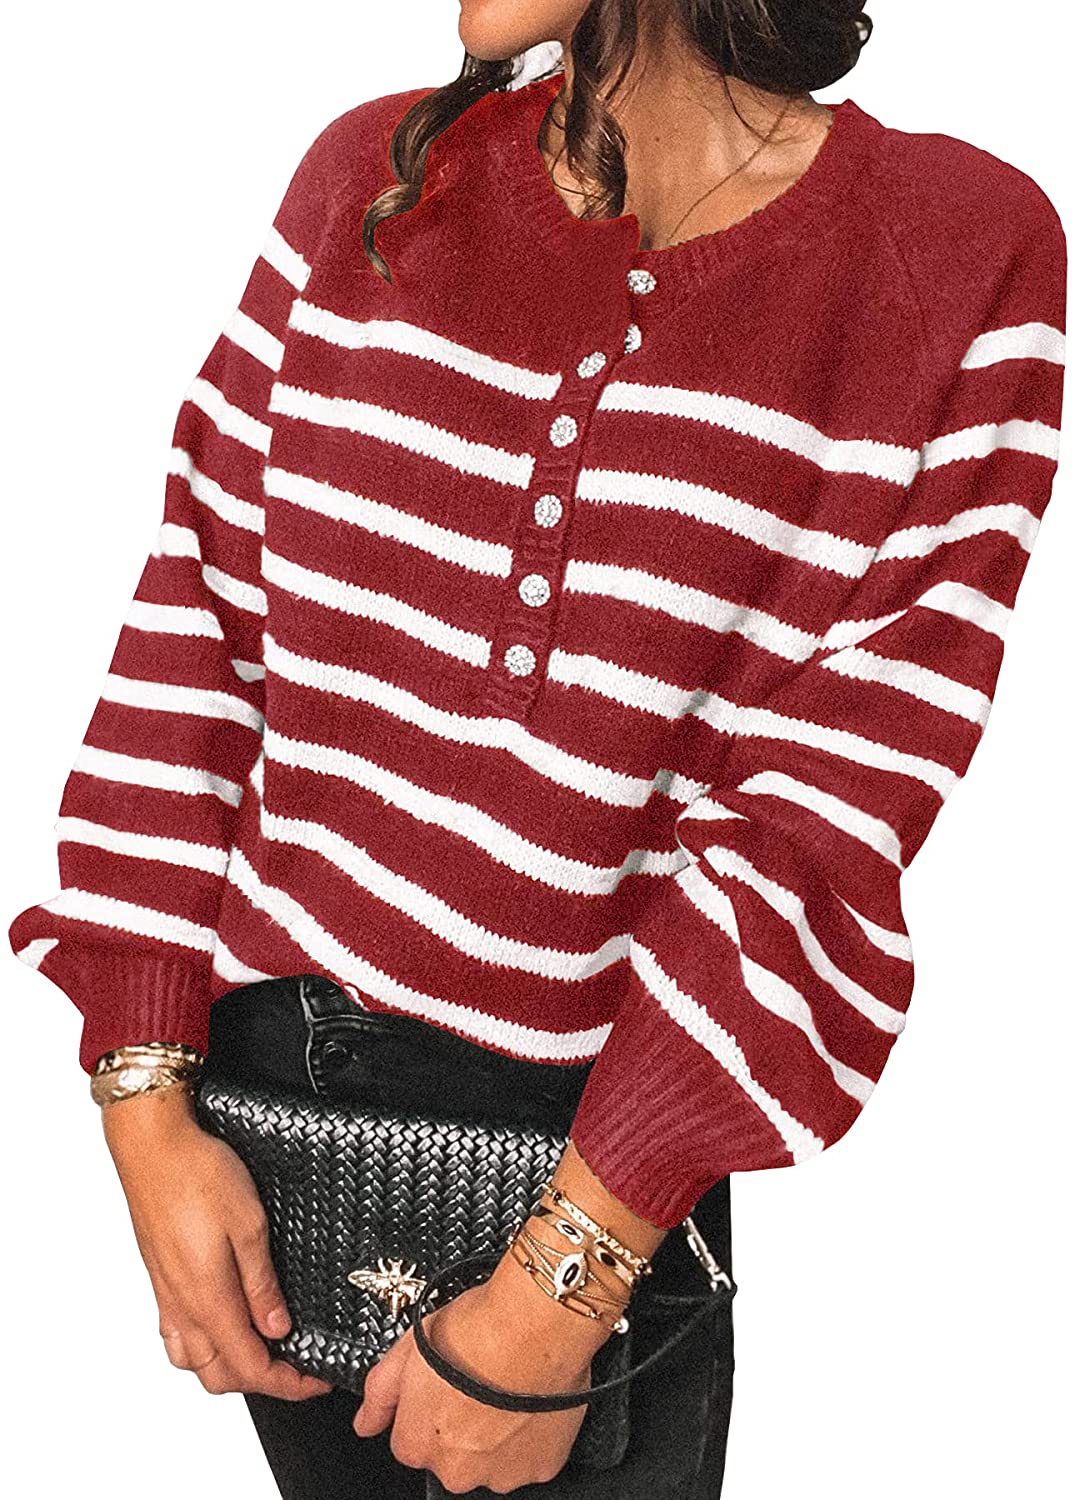 BTFBM Women's Sweaters Casual Long Sleeve Button Down Crew Neck Ruffle Knit  Pull